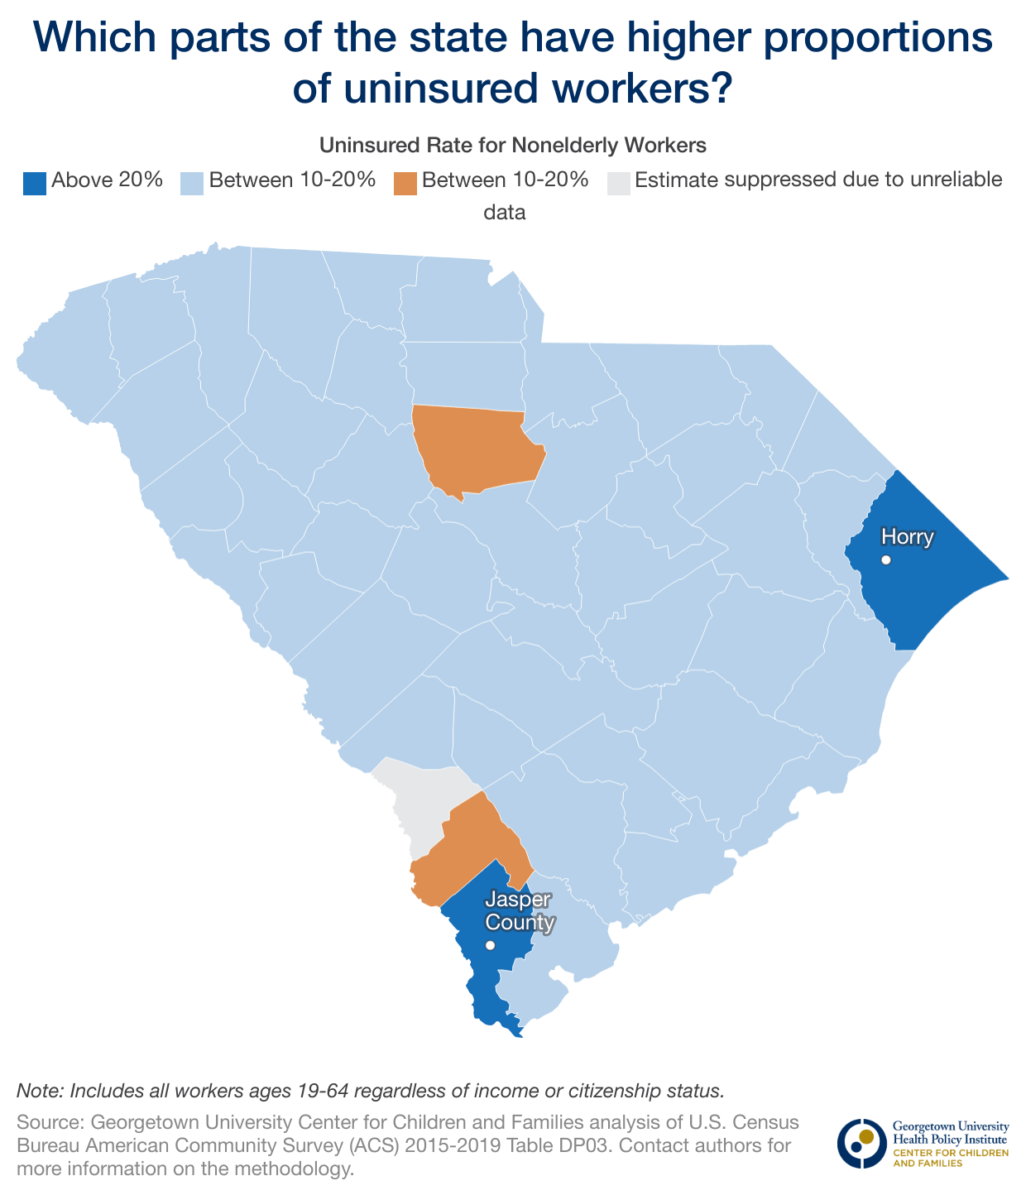 Map of South Carolina. Horry and Jasper county along the coastline are highlighted in blue, representing that over 20% of the county's workers are uninsured. The rest of the state falls between 10-20%.